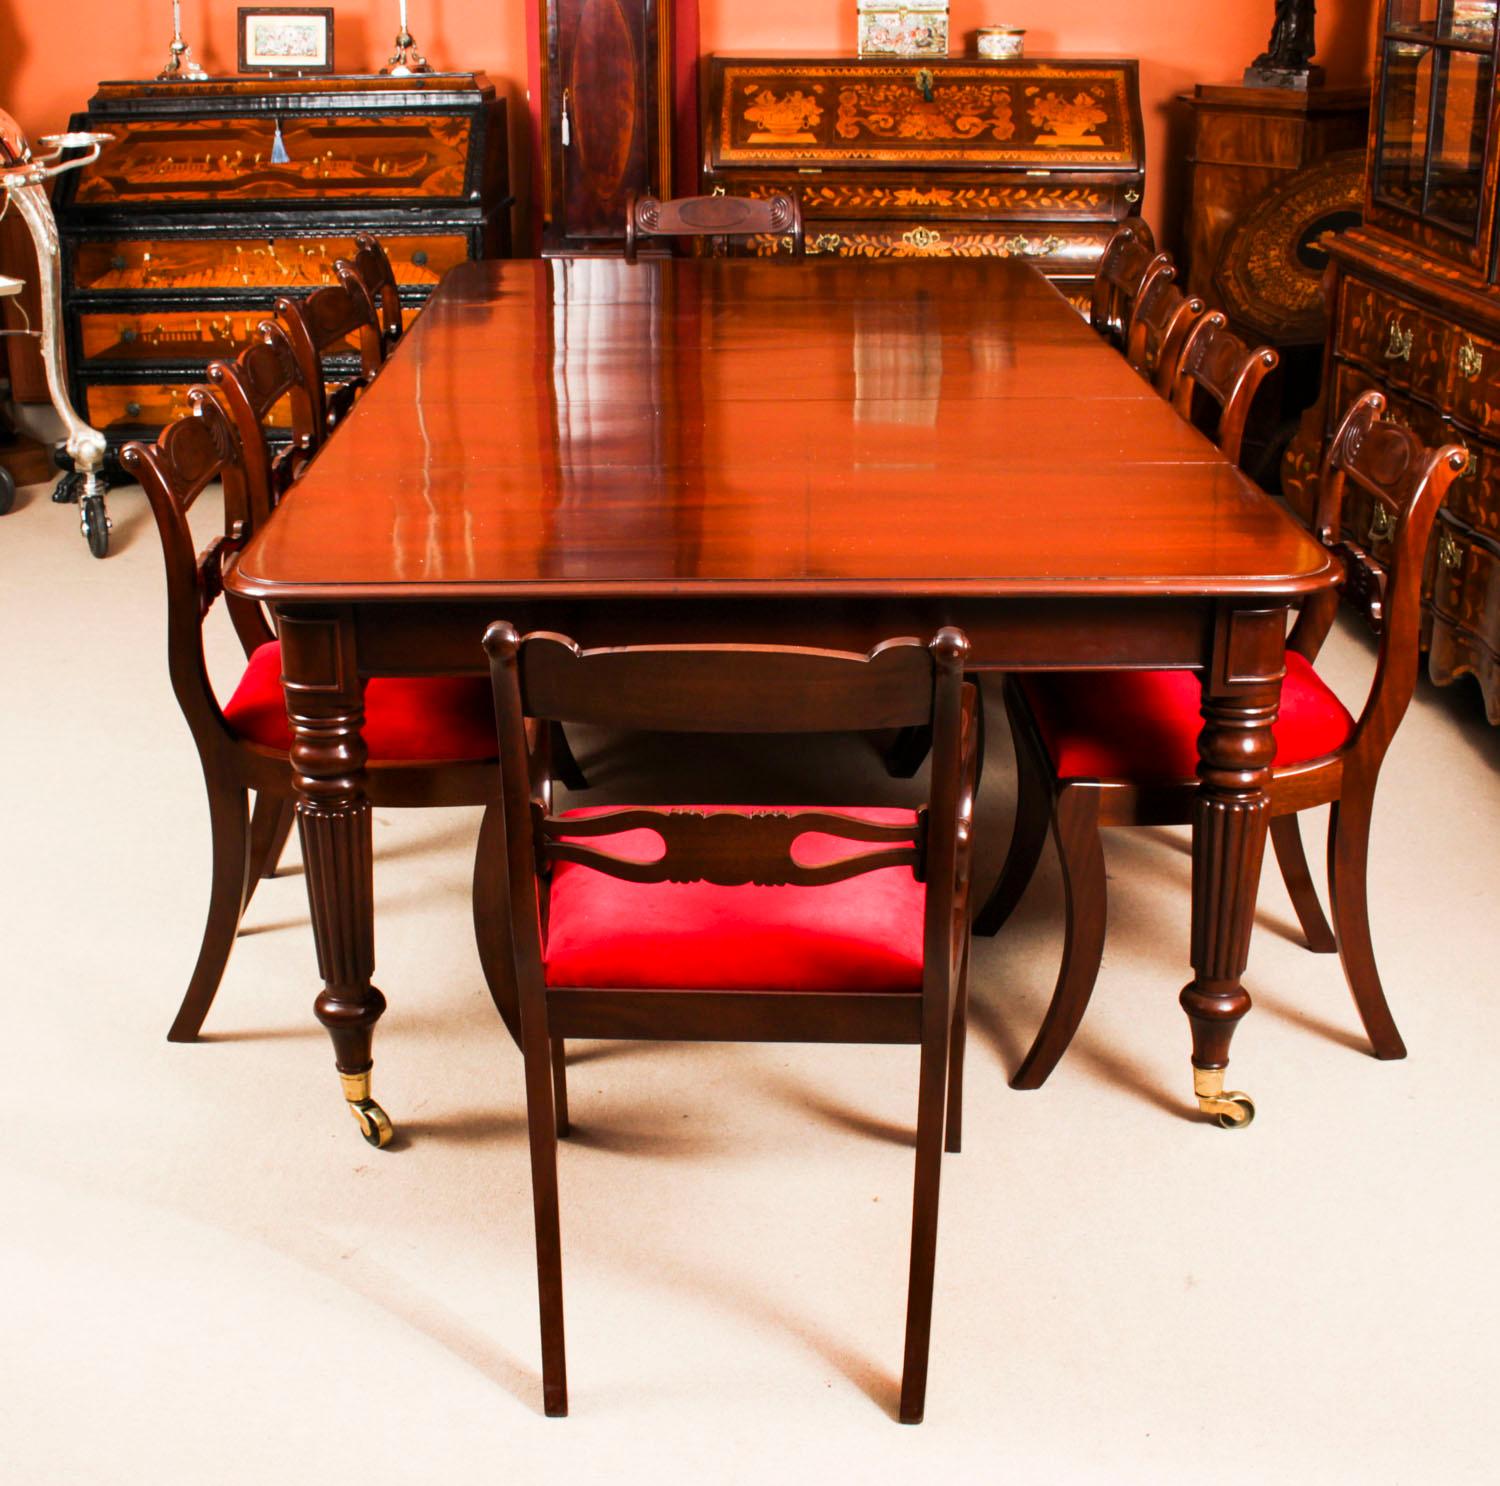 A very rare opportunity to own a fabulous dining set comprising an antique Regency dining table, and a set of ten antique Regency dining chairs, Circa 1820 in date.

The table is made of beautiful solid flame mahogany. This can be seen in the